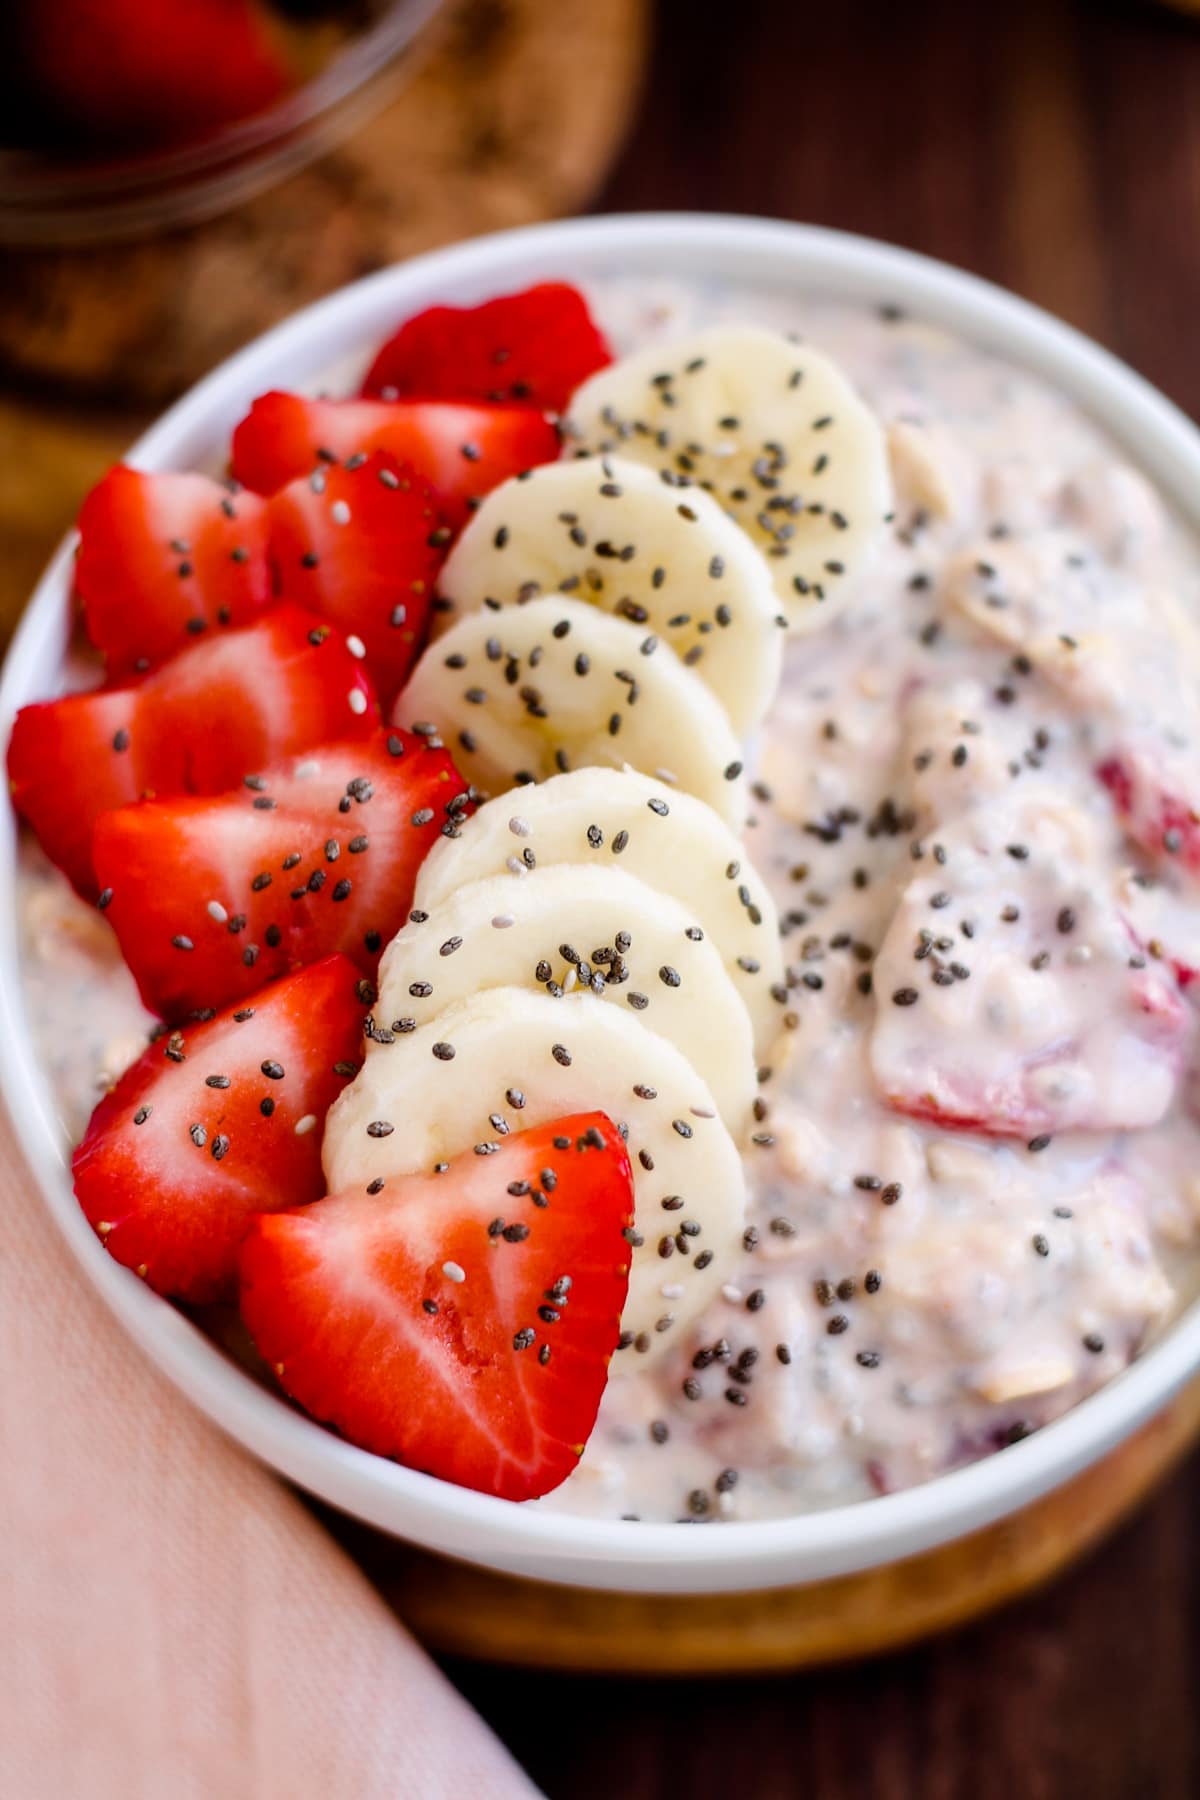 Overhead image of a bowl of strawberry overnight oats.